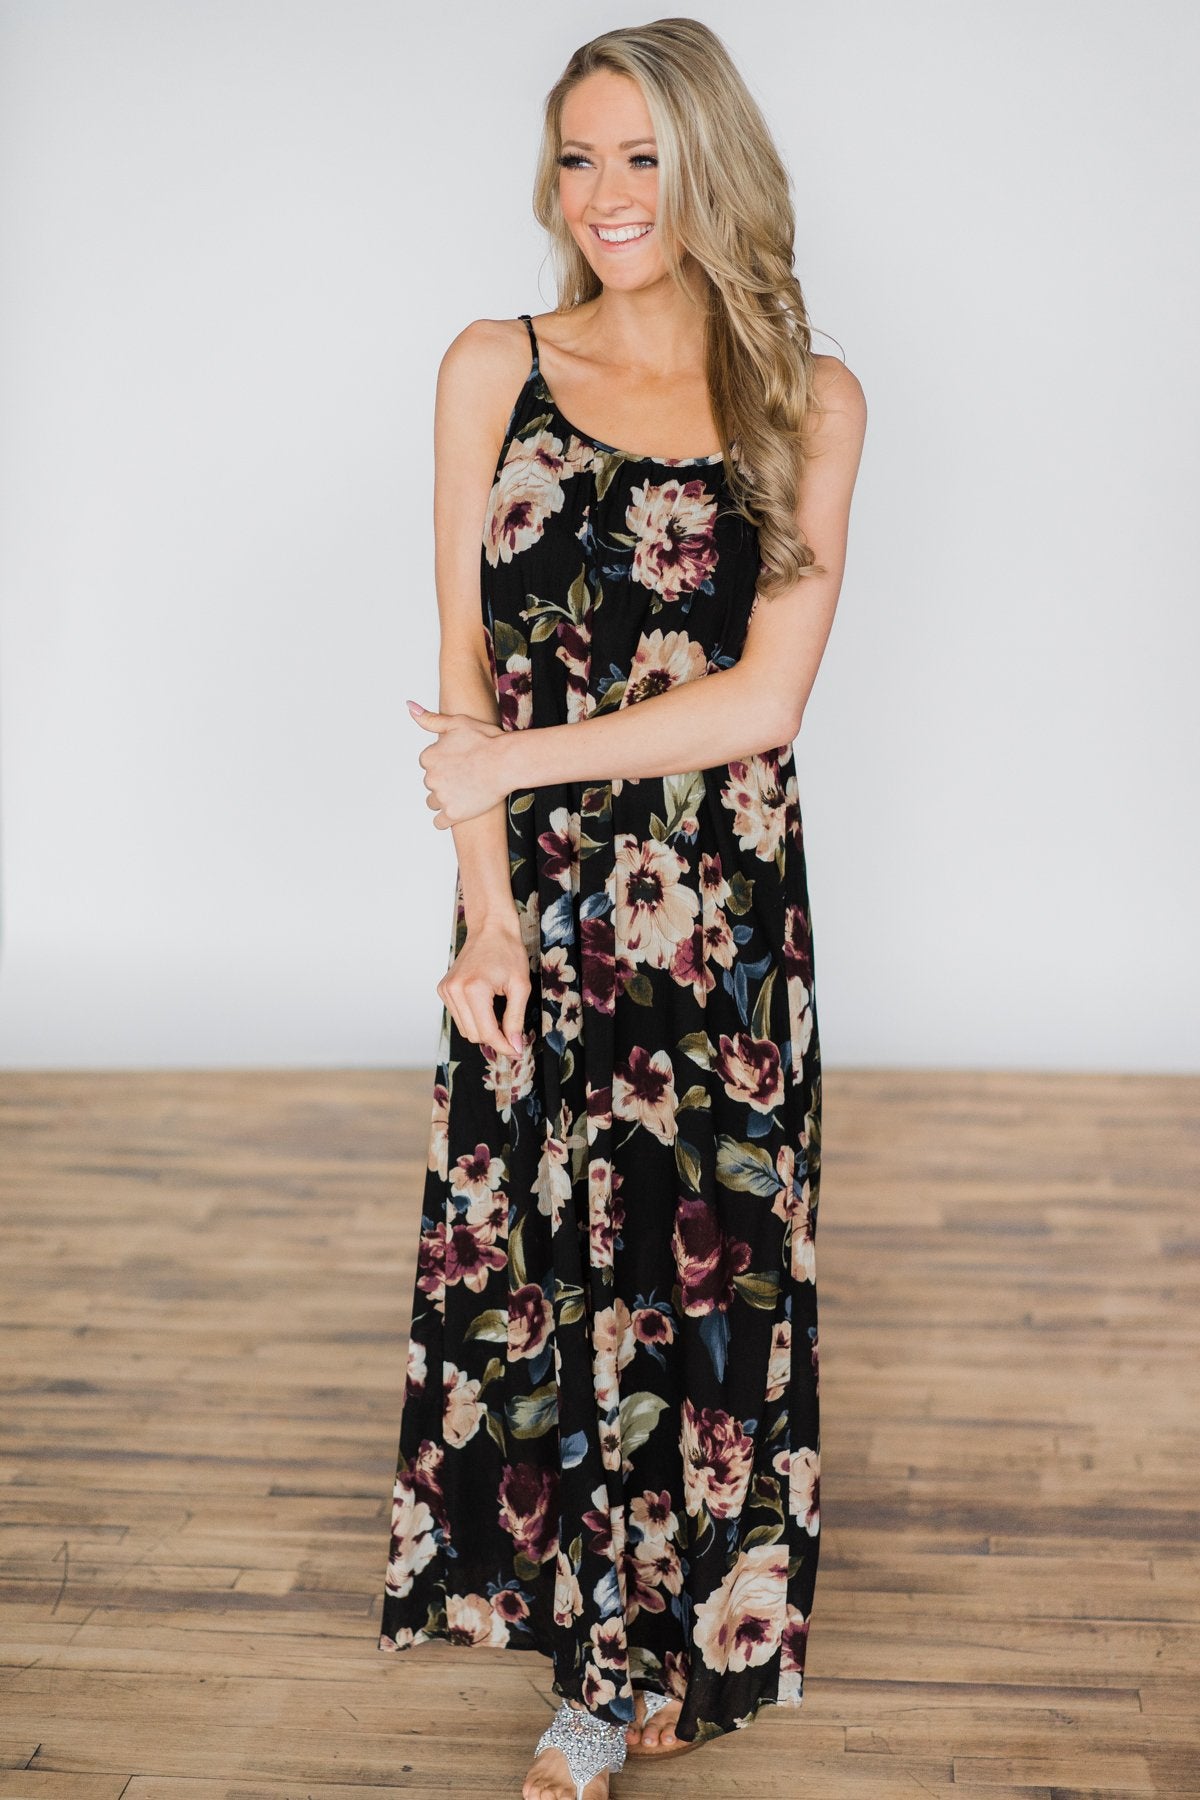 Born to Love You Floral Maxi Dress